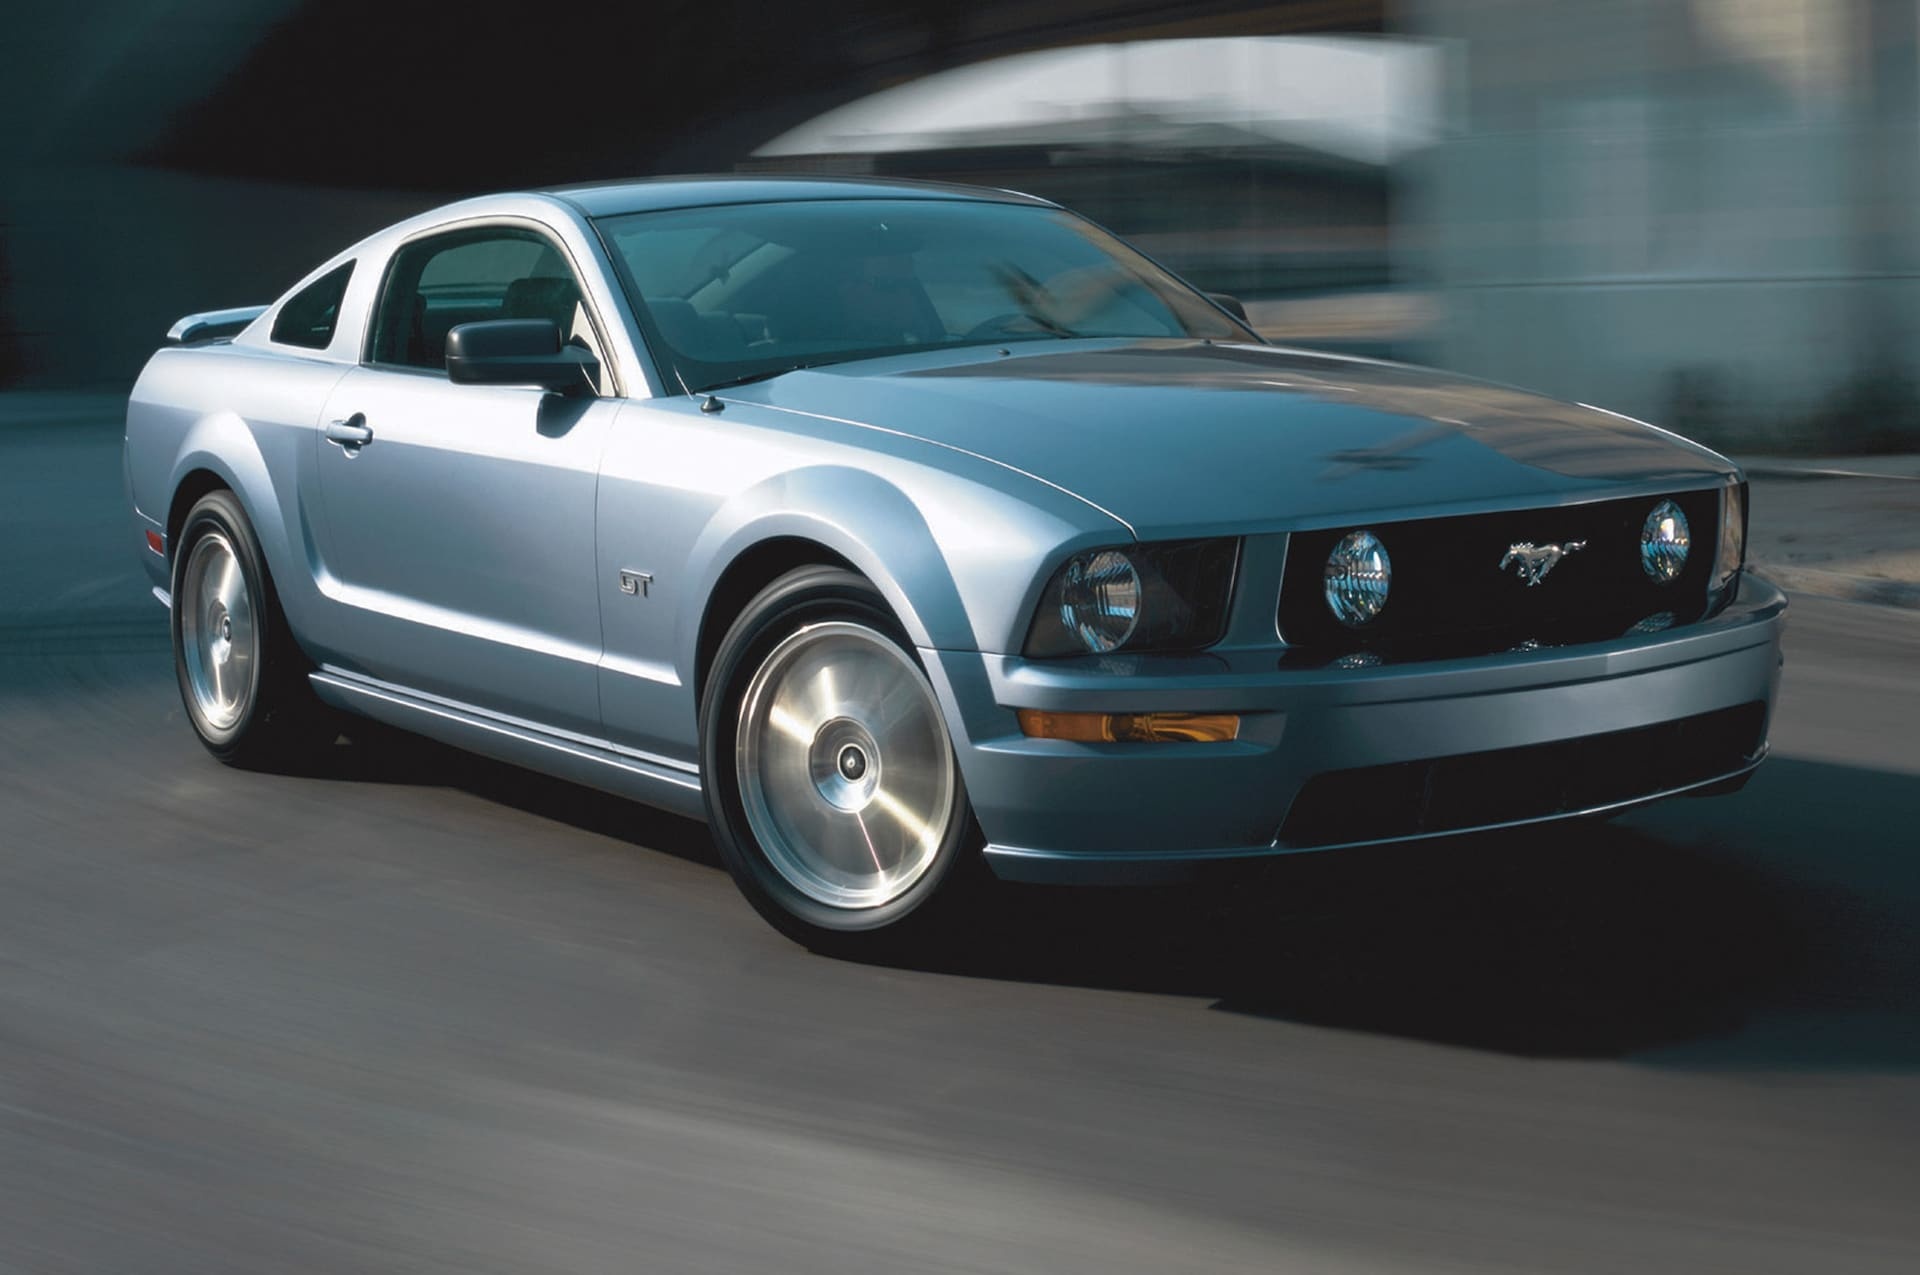 2005 Mustang GT, Track testing, Ford performance, Sporting prowess, Car dynamics, 1920x1280 HD Desktop